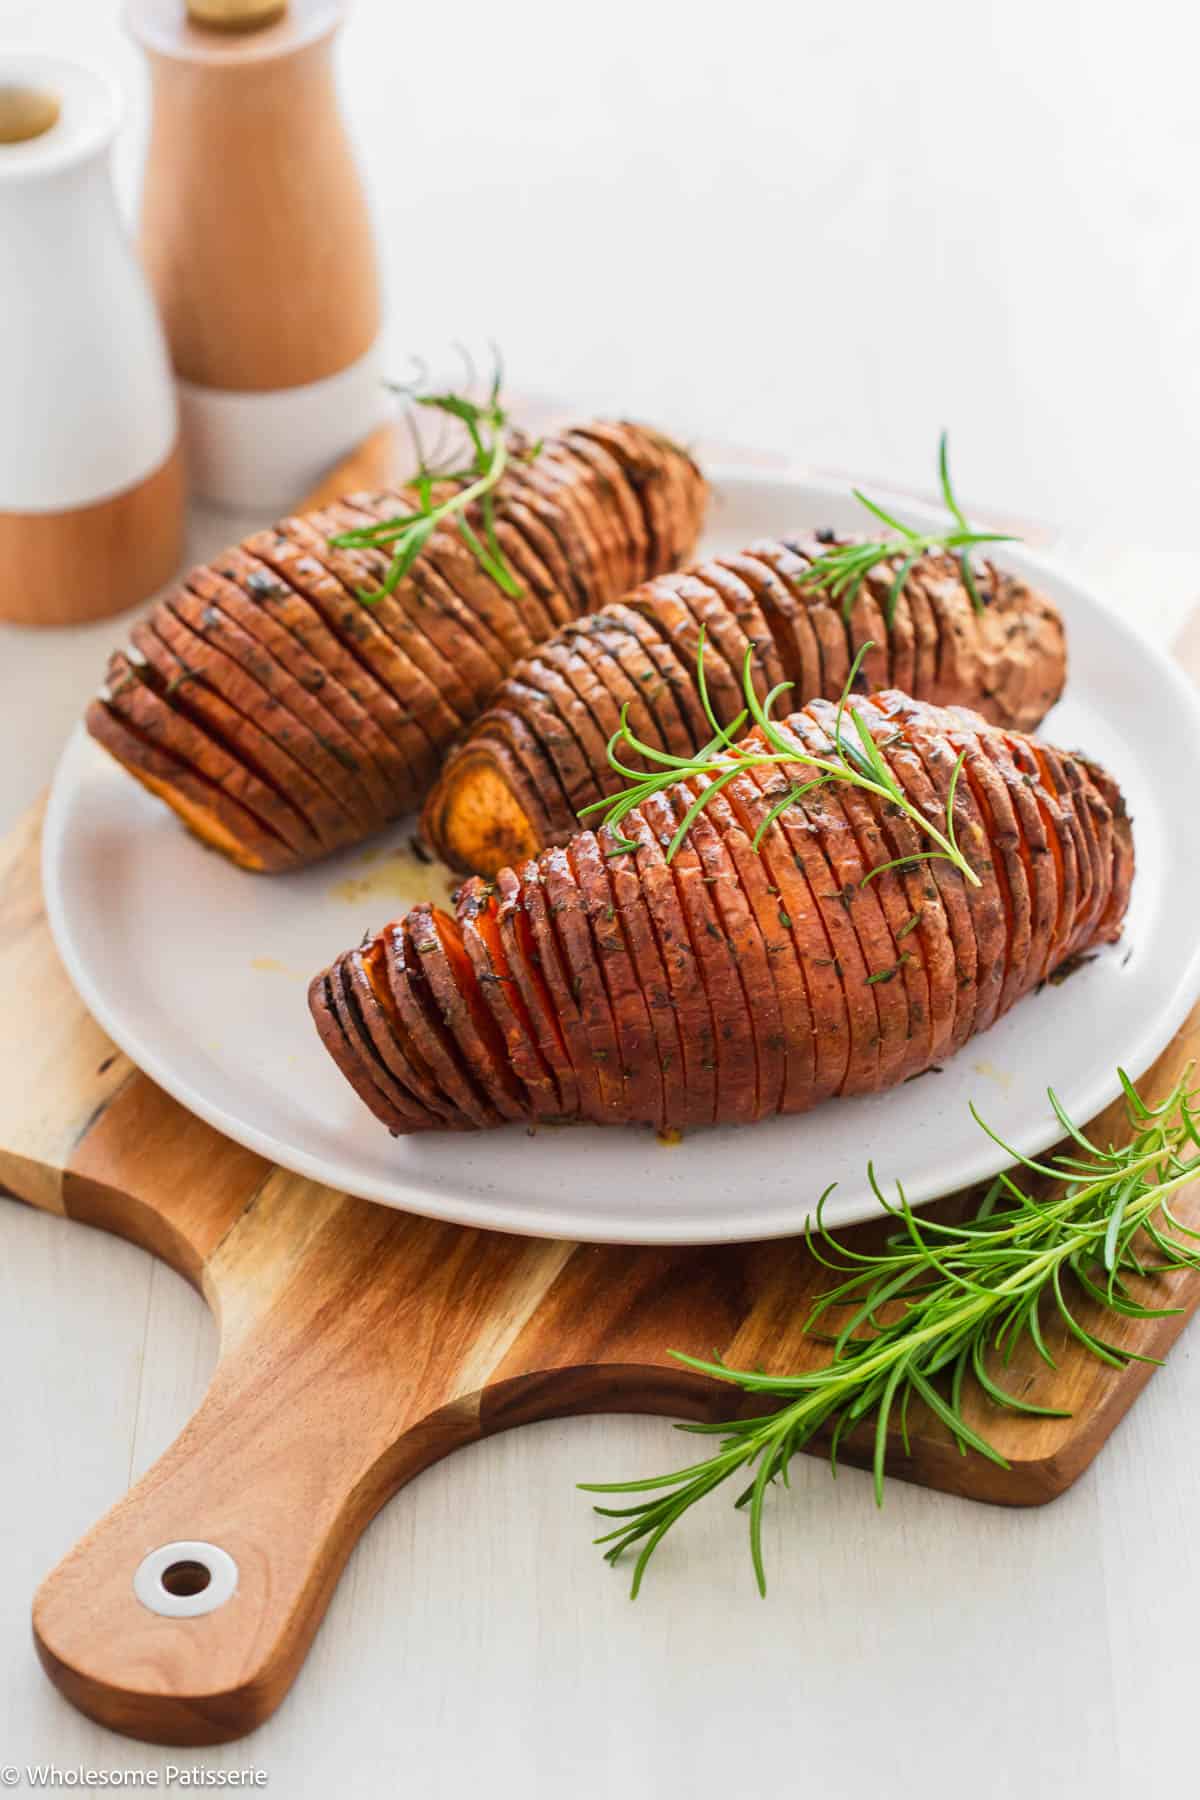 Hasselback sweet potatoes on serving plate sitting on a large wooden board and garnished with fresh rosemary sprigs.